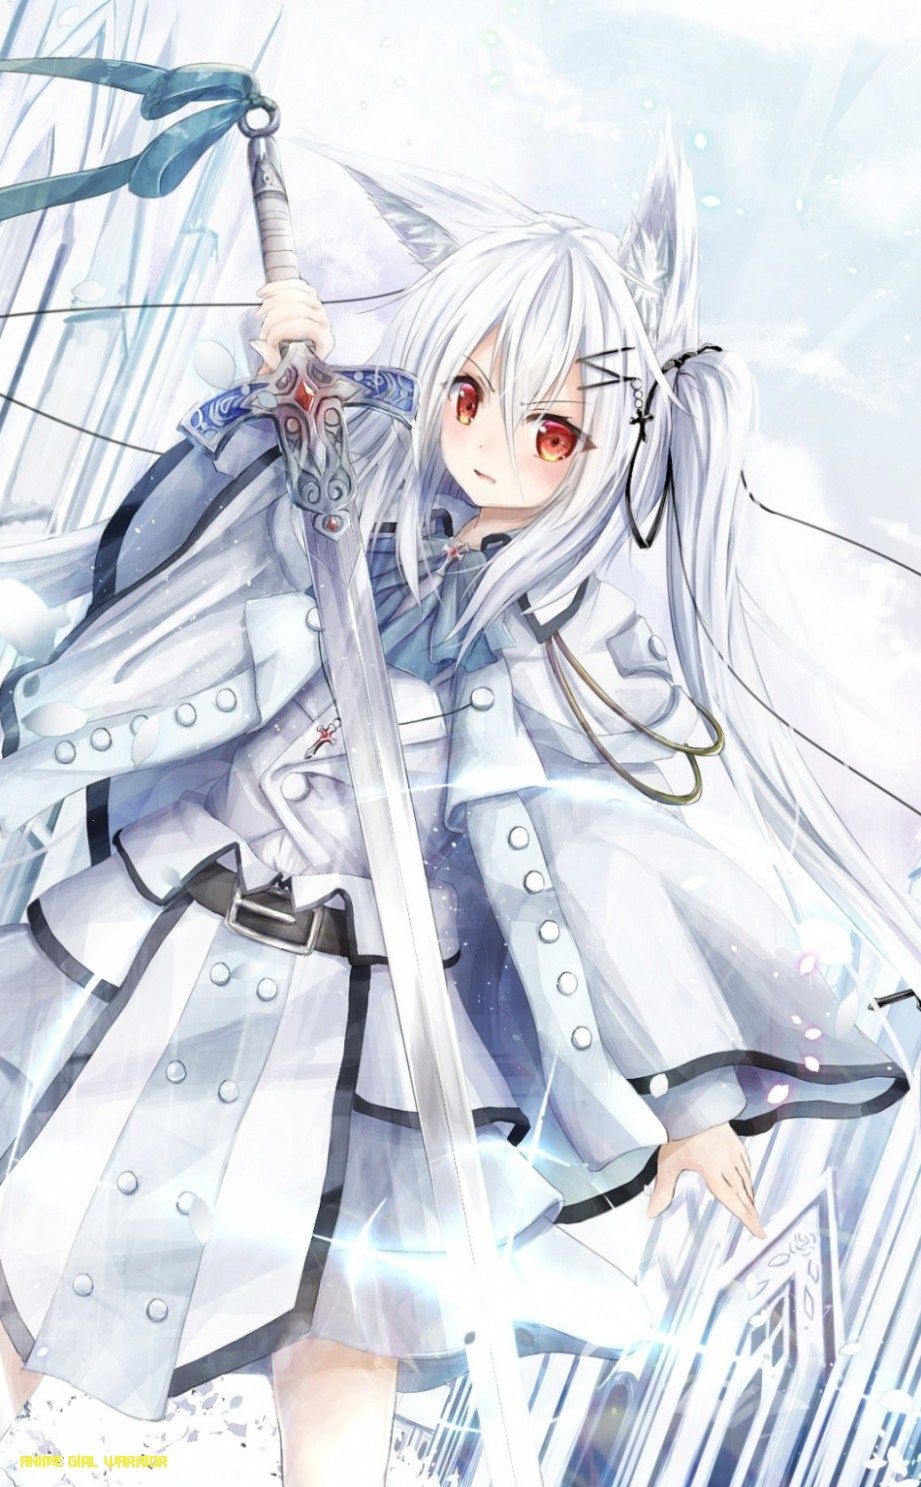 Cool Anime Girl With White Hair